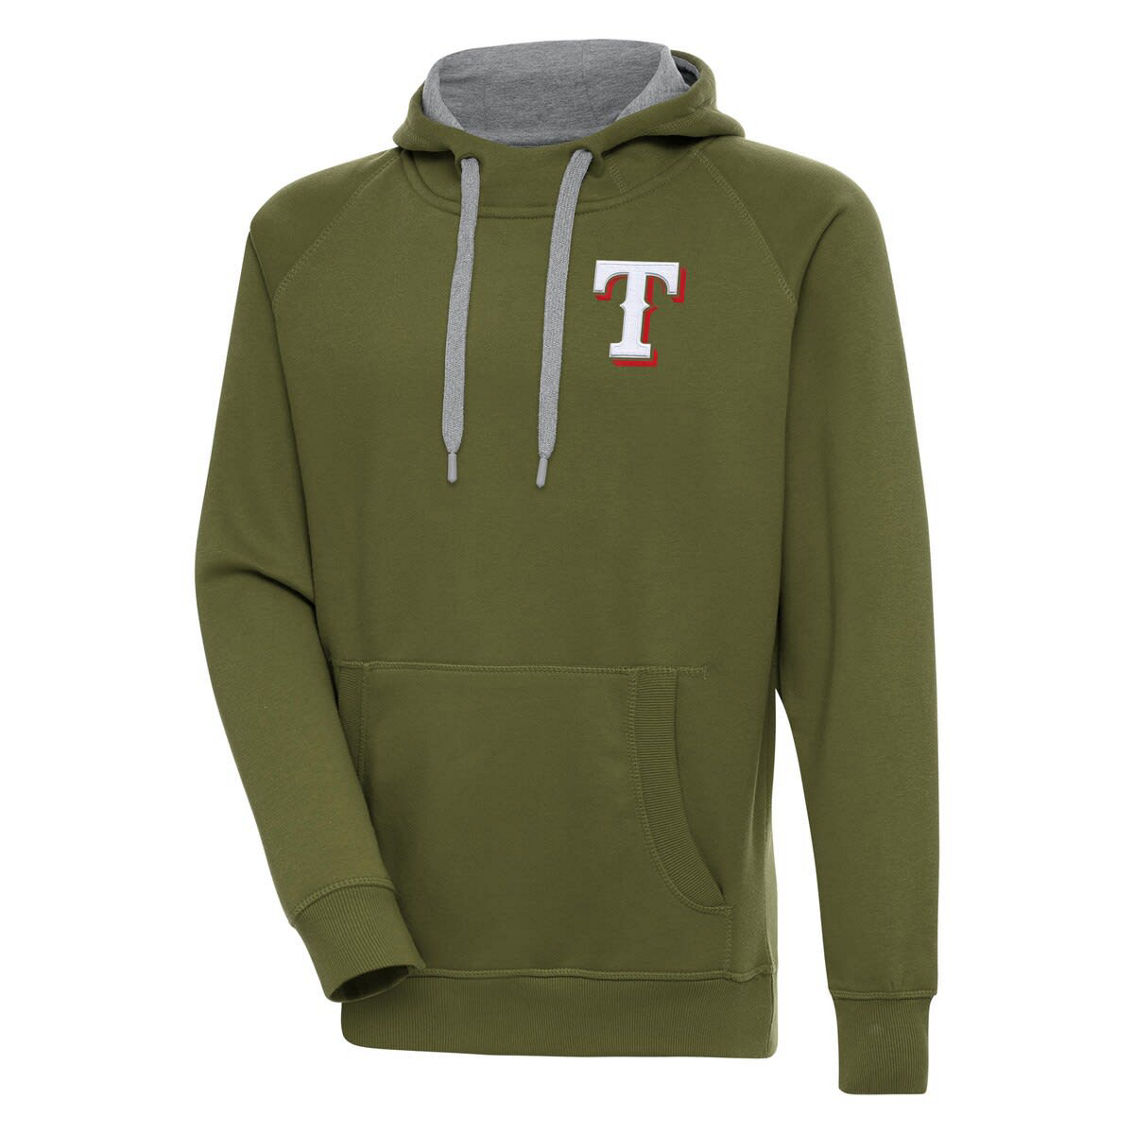 Antigua Men's Olive Texas Rangers Victory Pullover Hoodie - Image 2 of 2